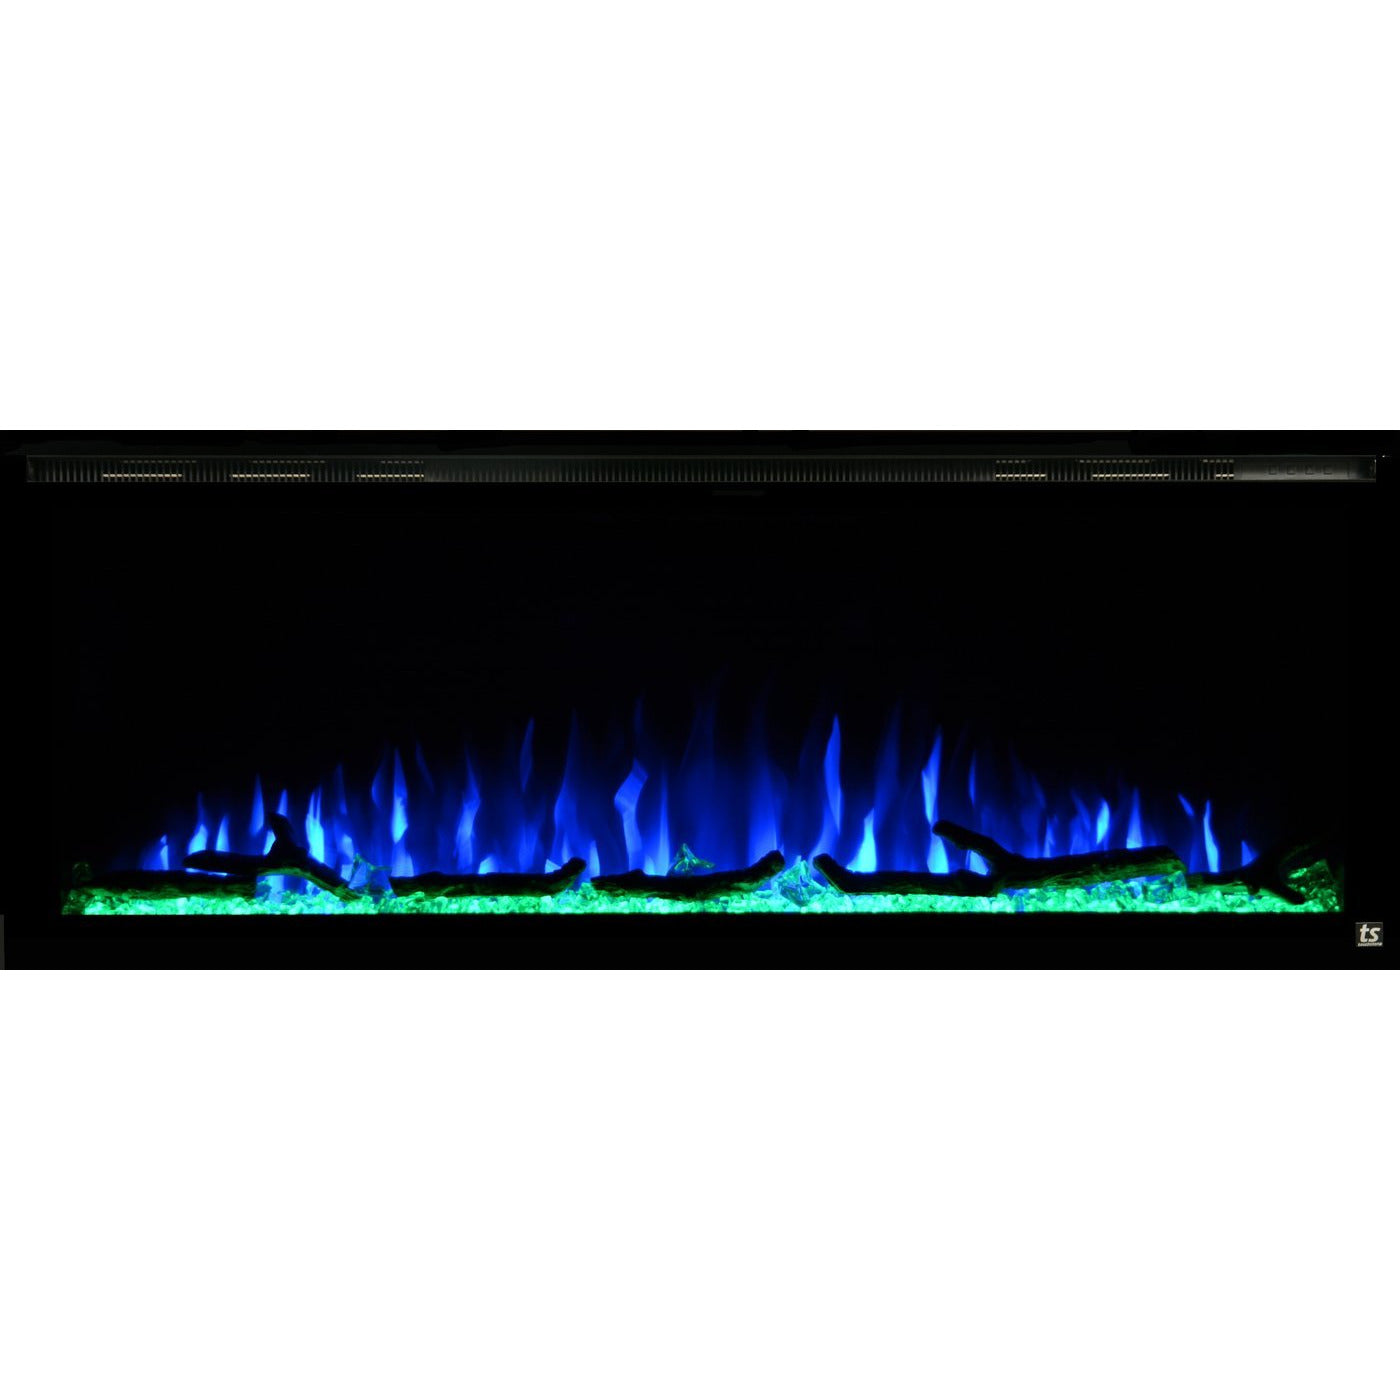  Black Touchstone Sideline Elite Recessed Electric Fireplace in combination of blue, purple flame with green crystals.